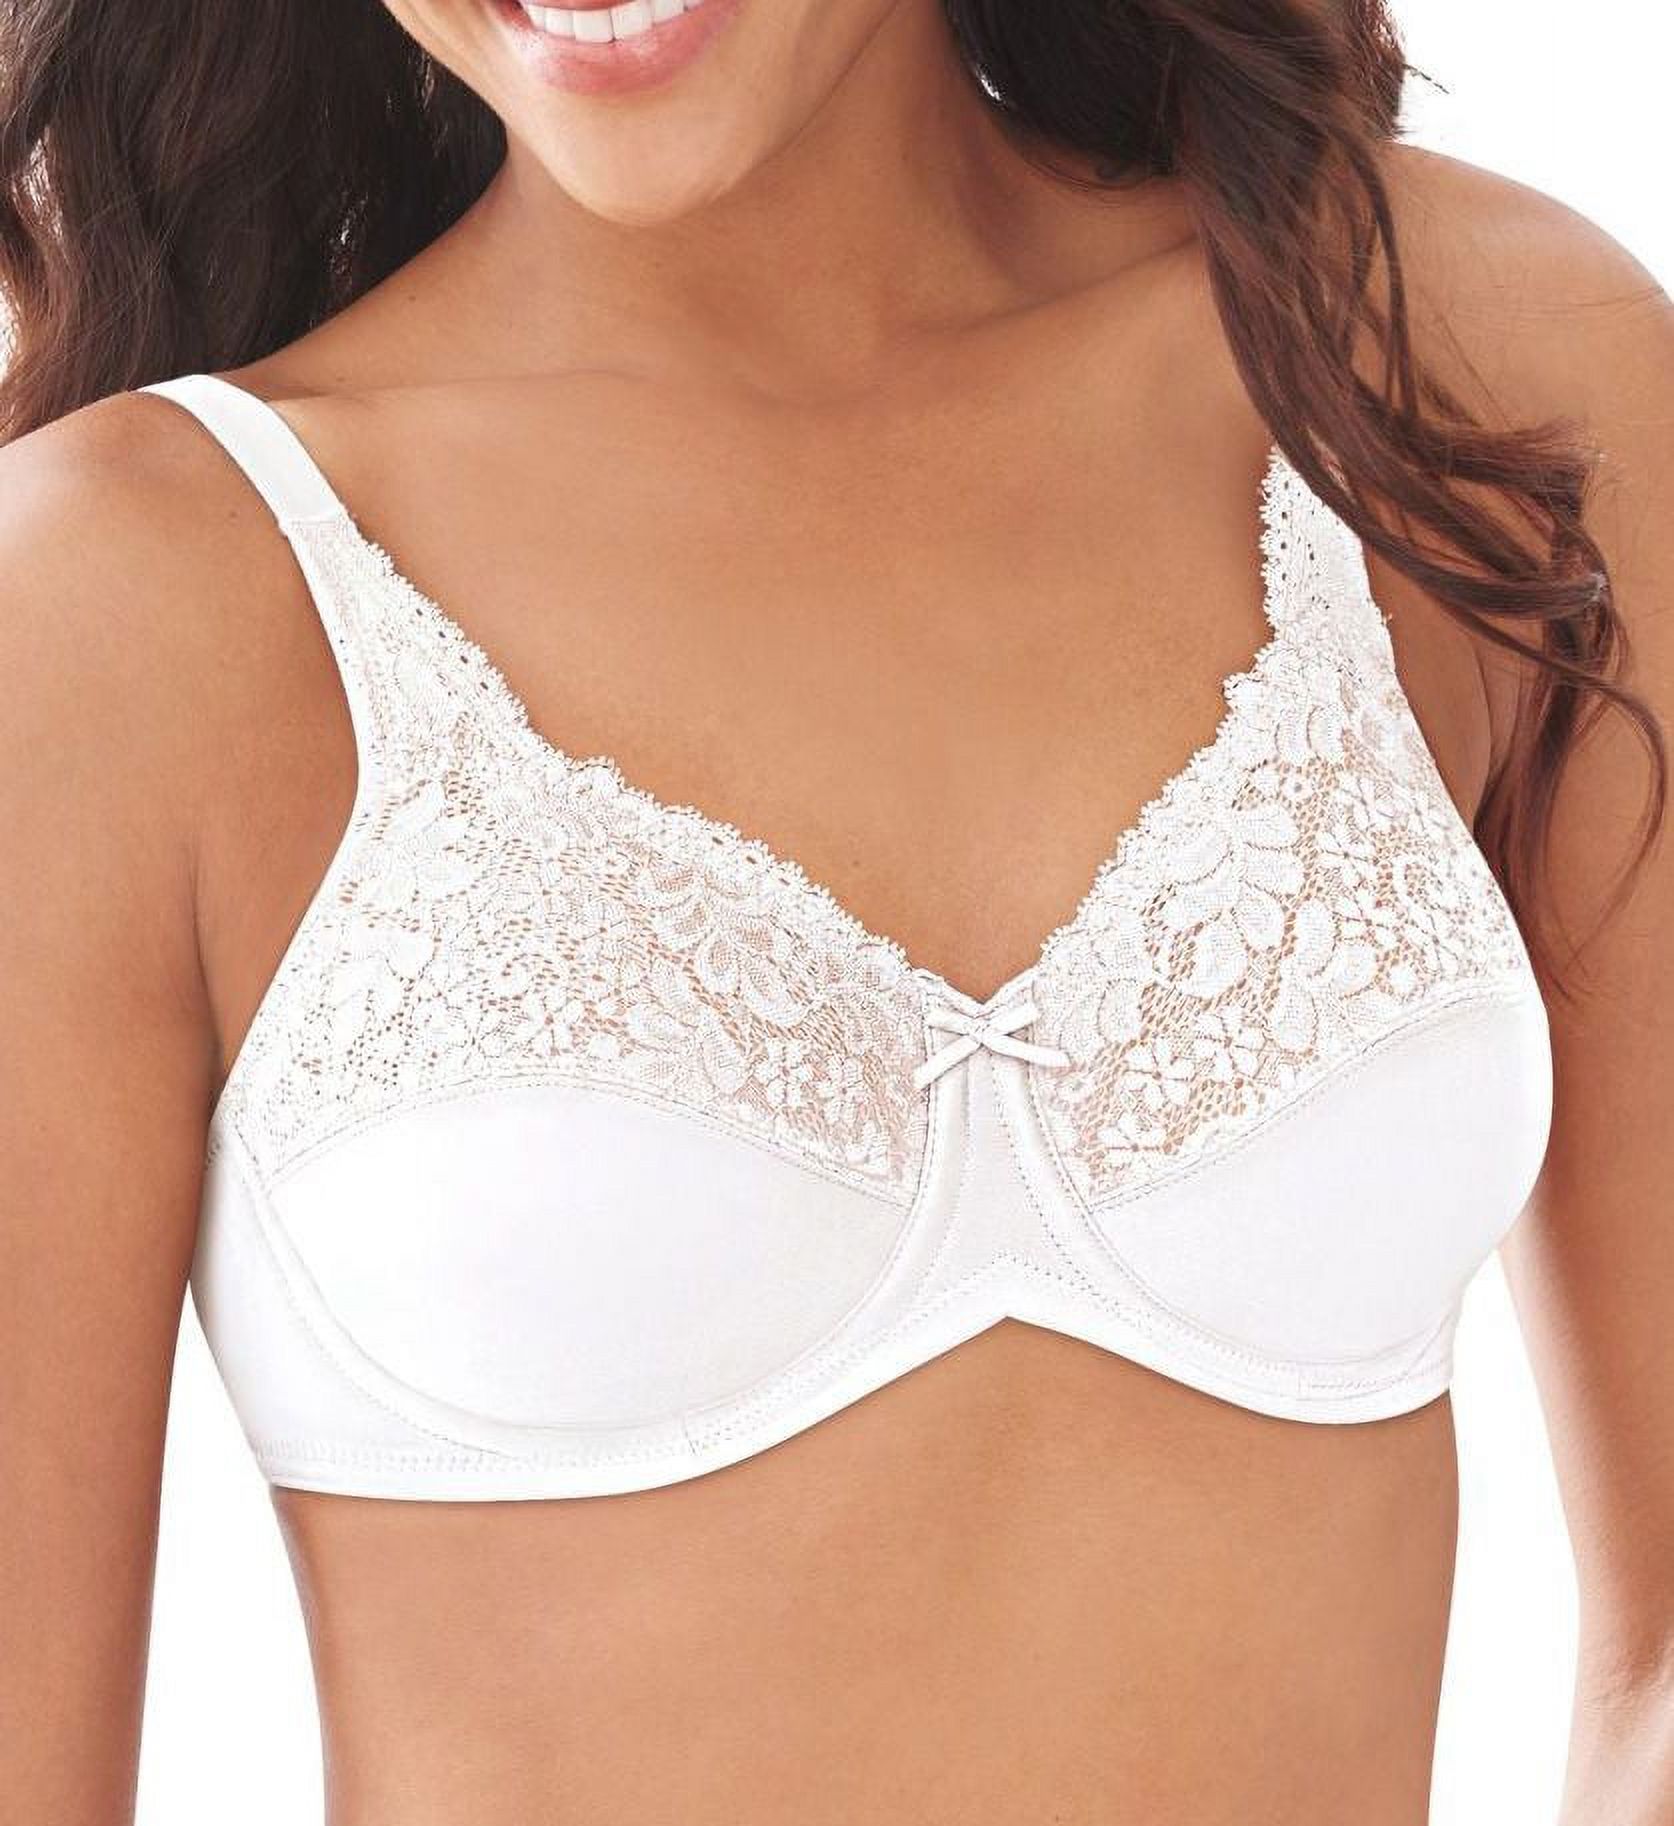 Lilyette By Bali Minimizer Underwire Bra Womens Full Coverage Seamless LY0428 - image 1 of 2